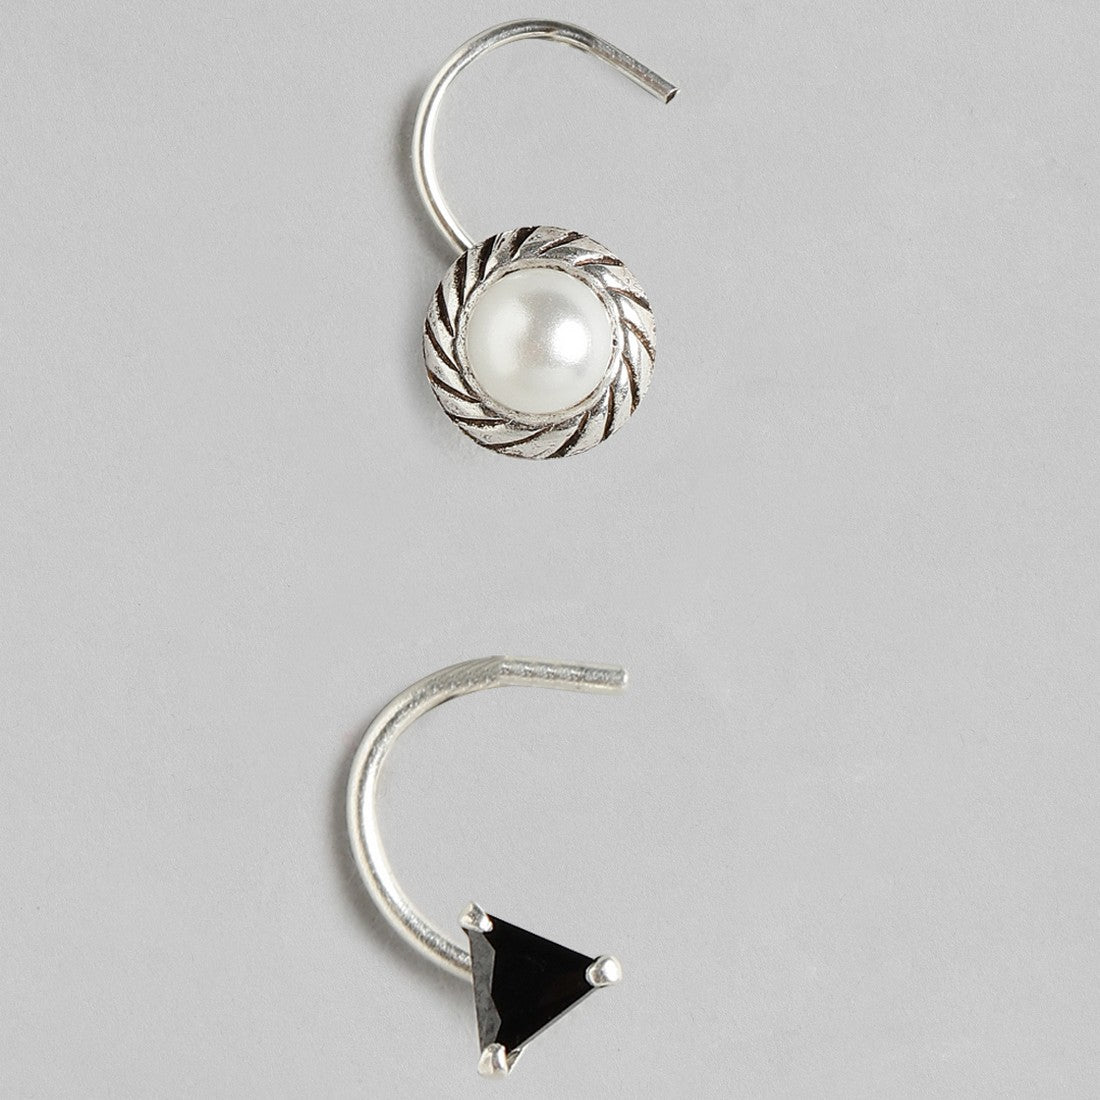 The Black & White Duo 925 Silver Nose Pin Set